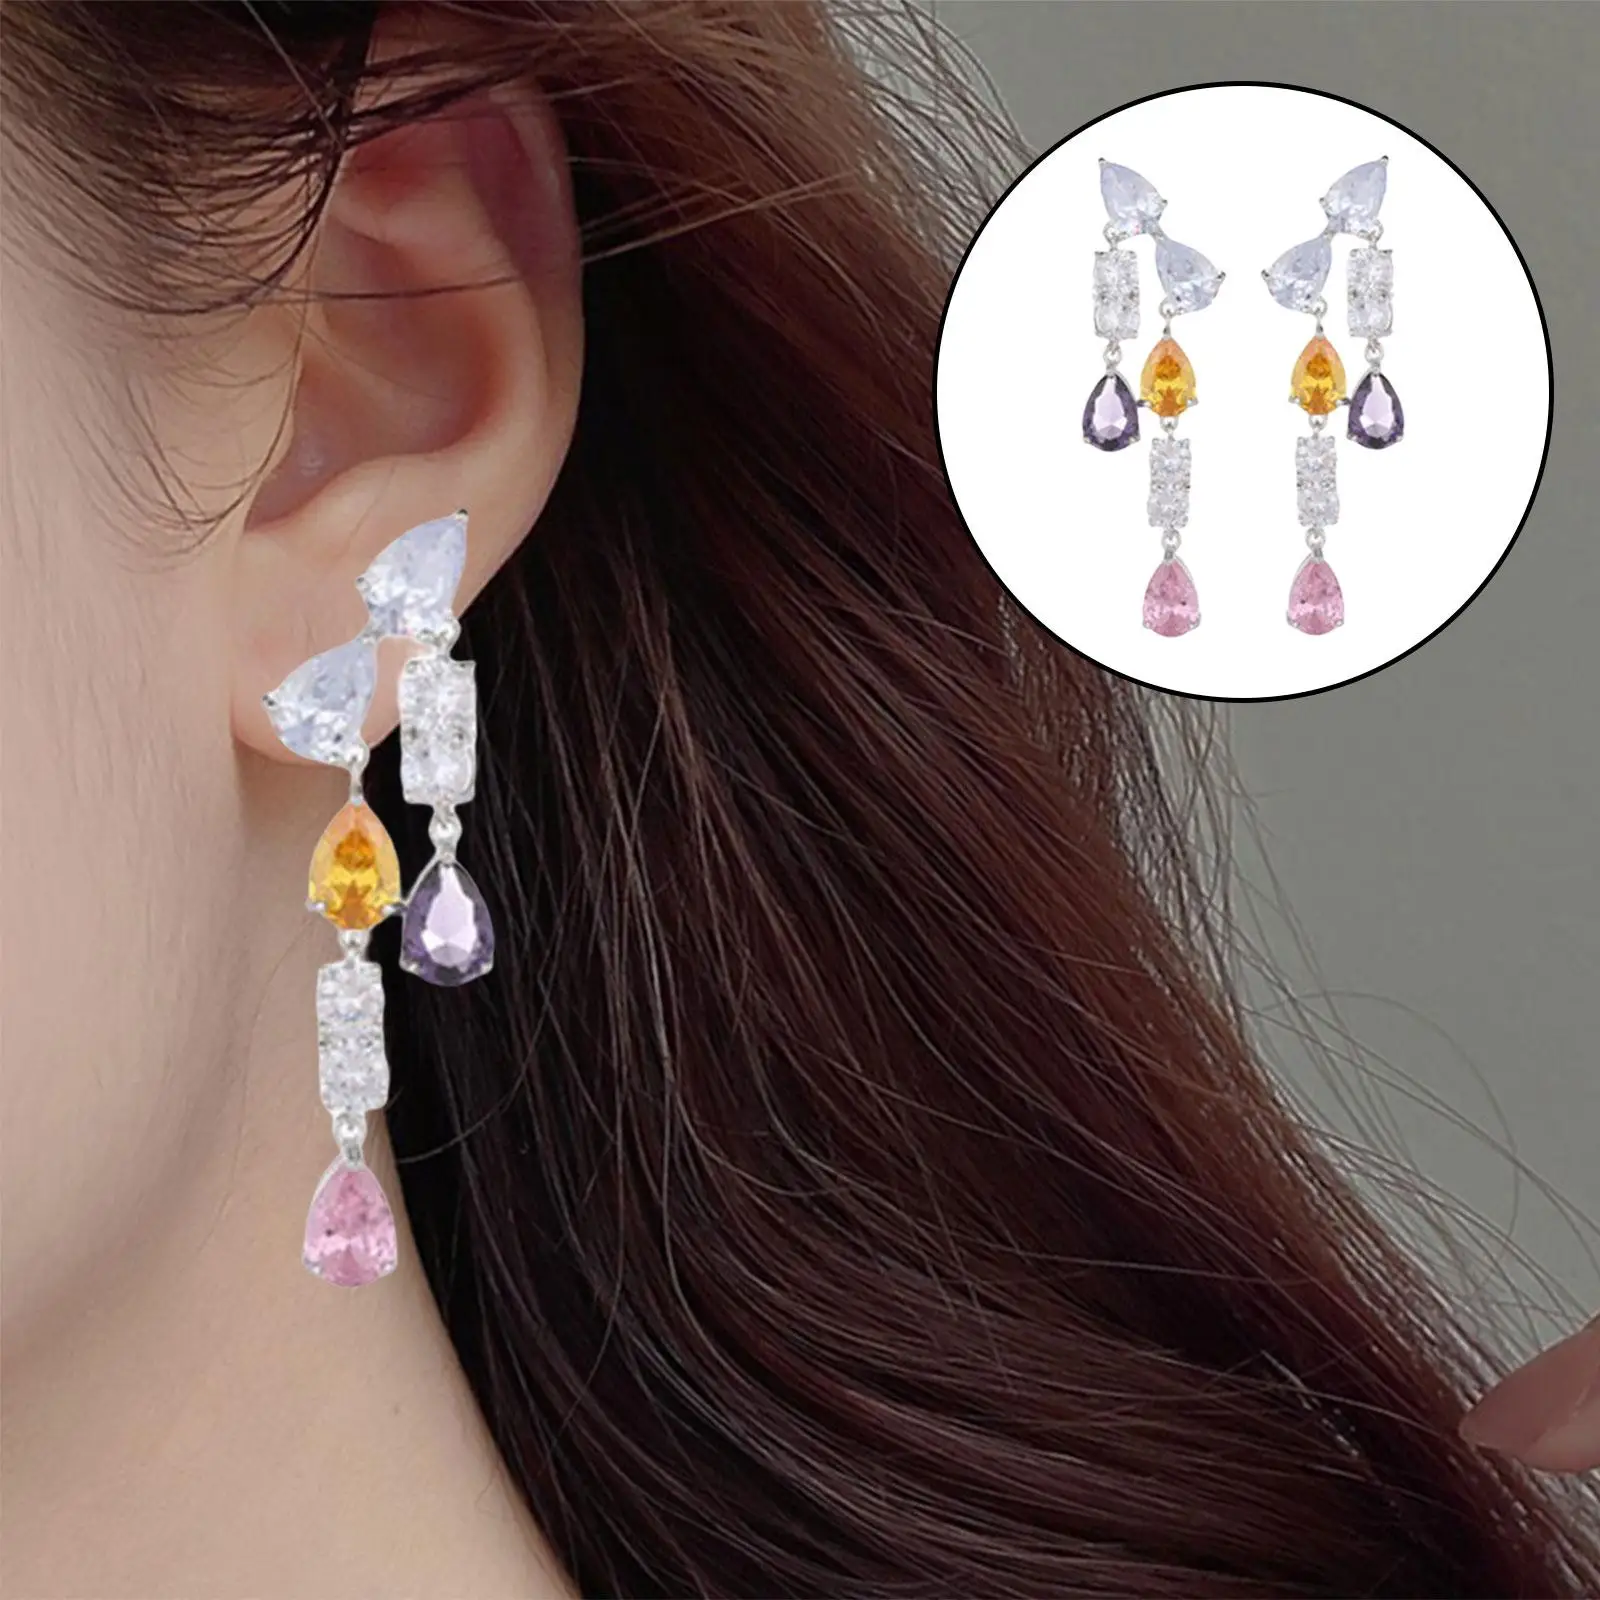 2 Pieces Colorful Dangle Earrings Lightweight Clothing Accessories Lady Shiny for Beach Graduation